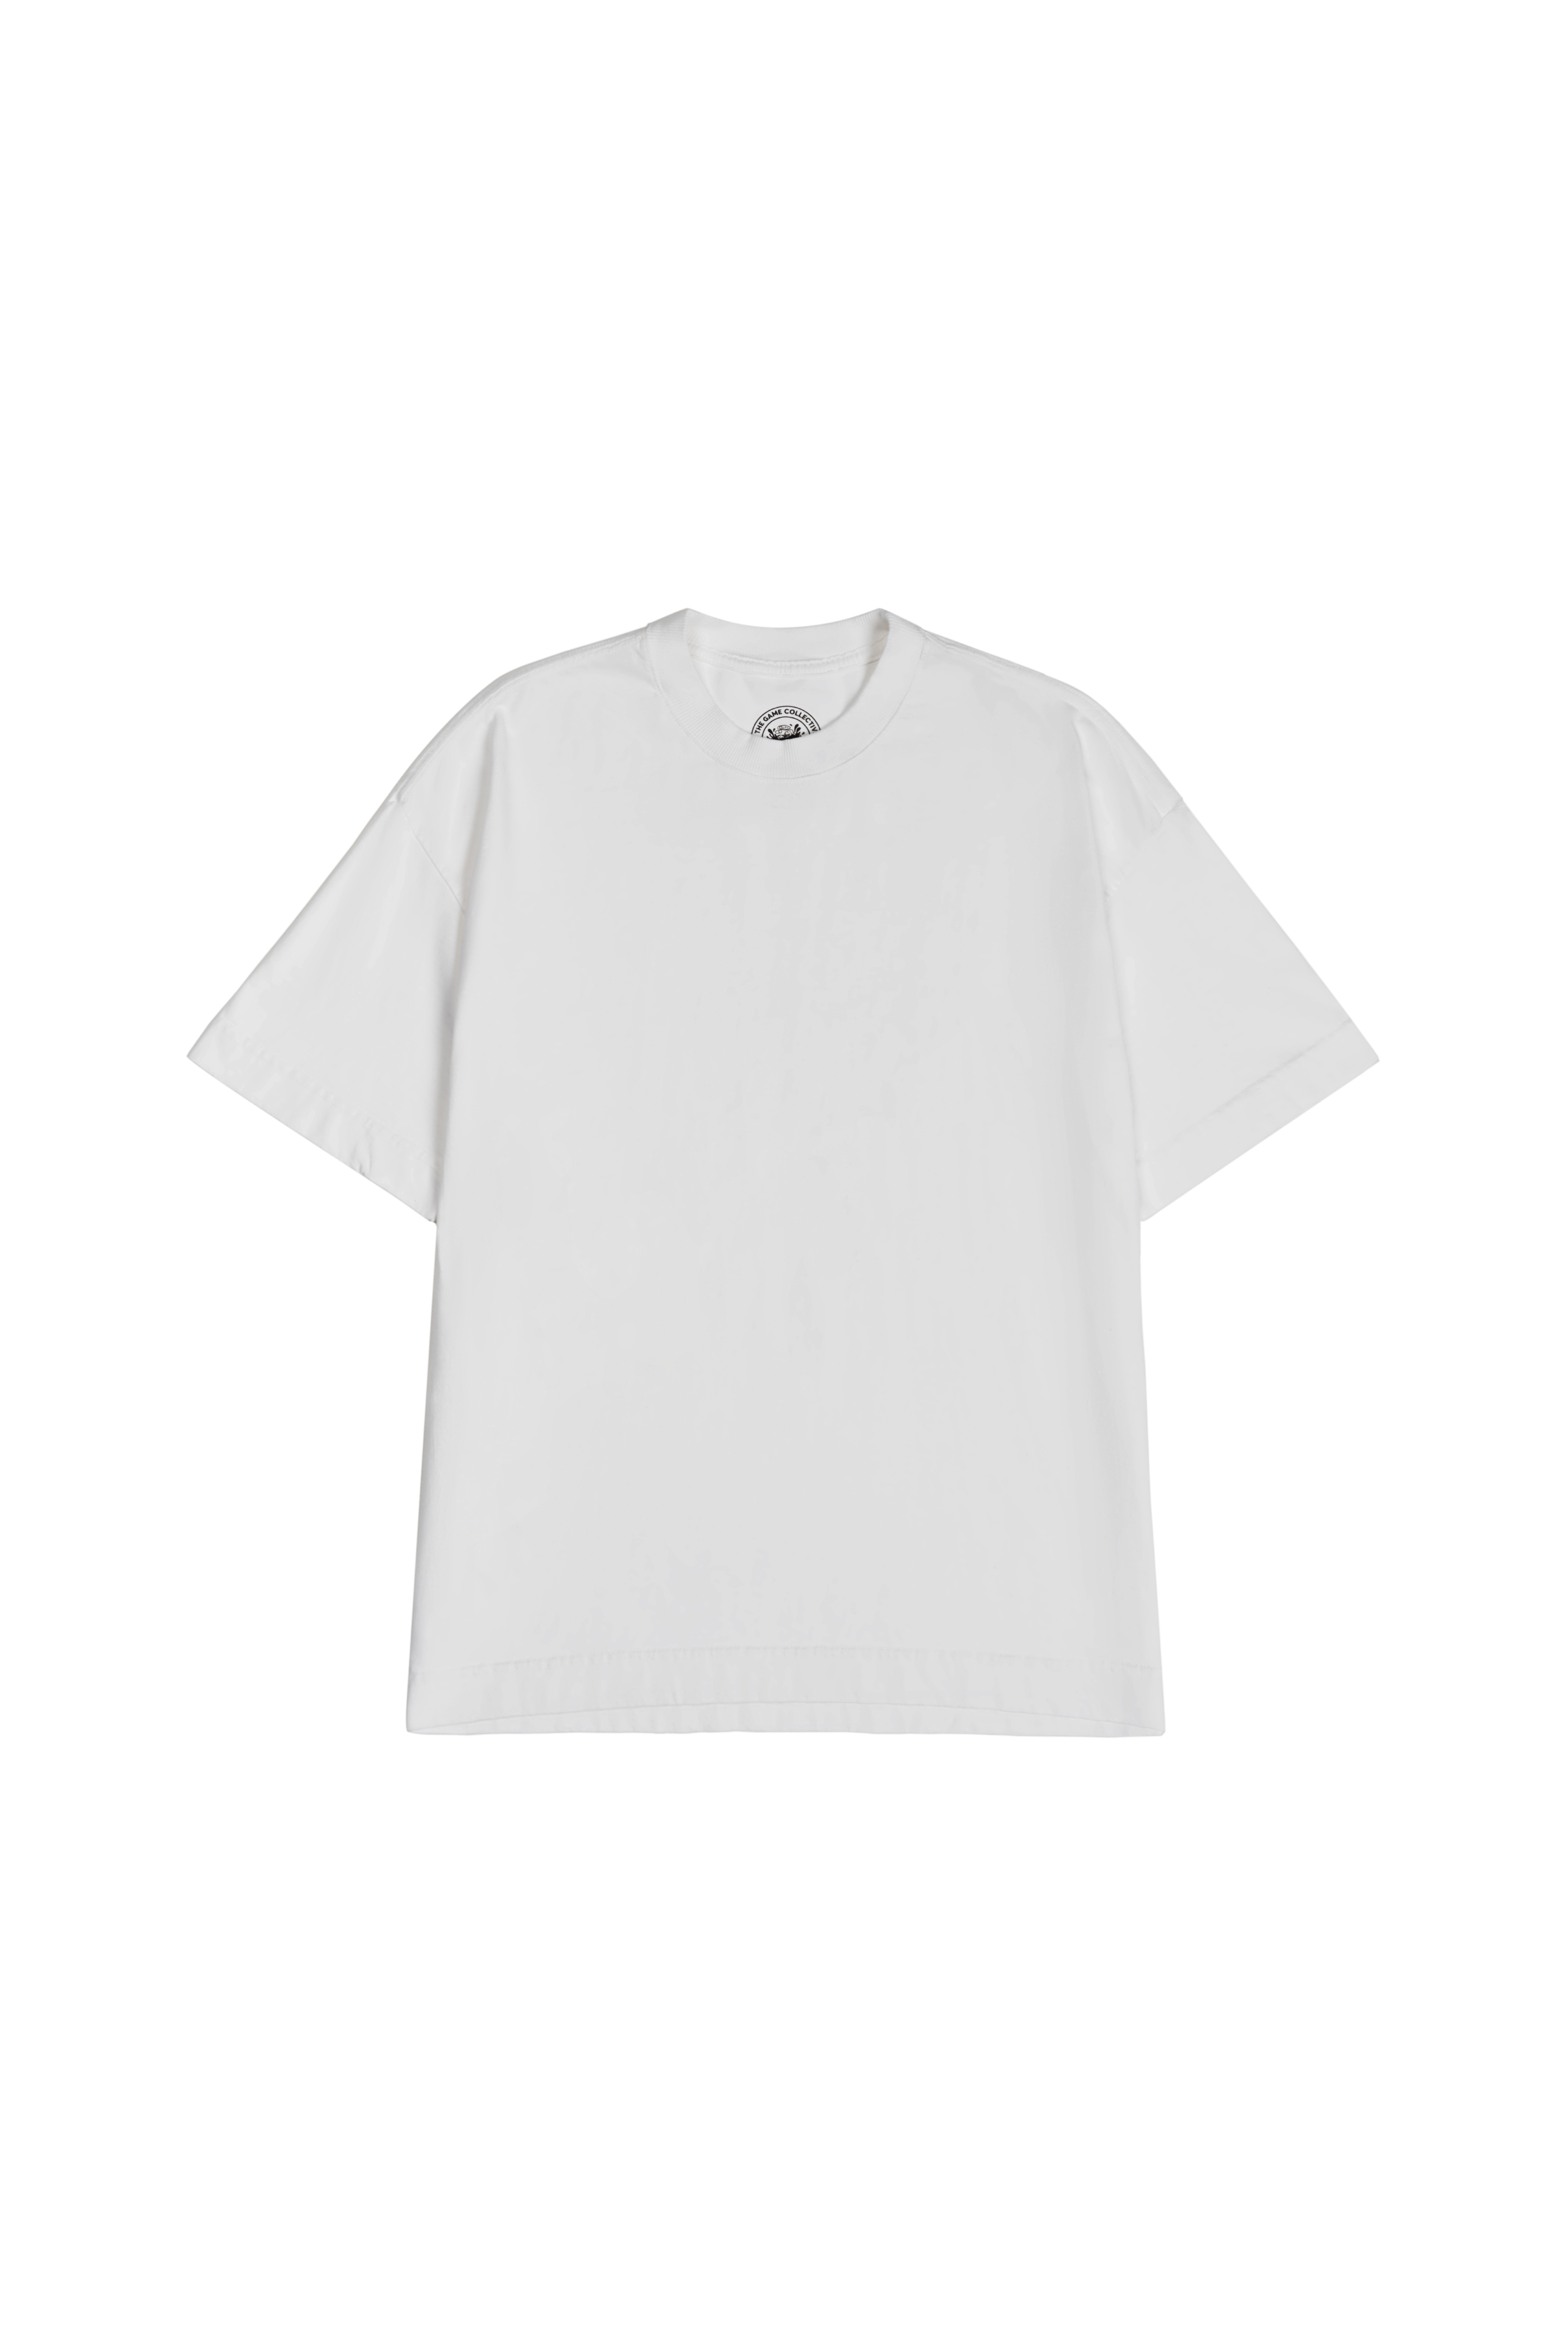 THE GAME - Not That Basic Tee® "Off-White"